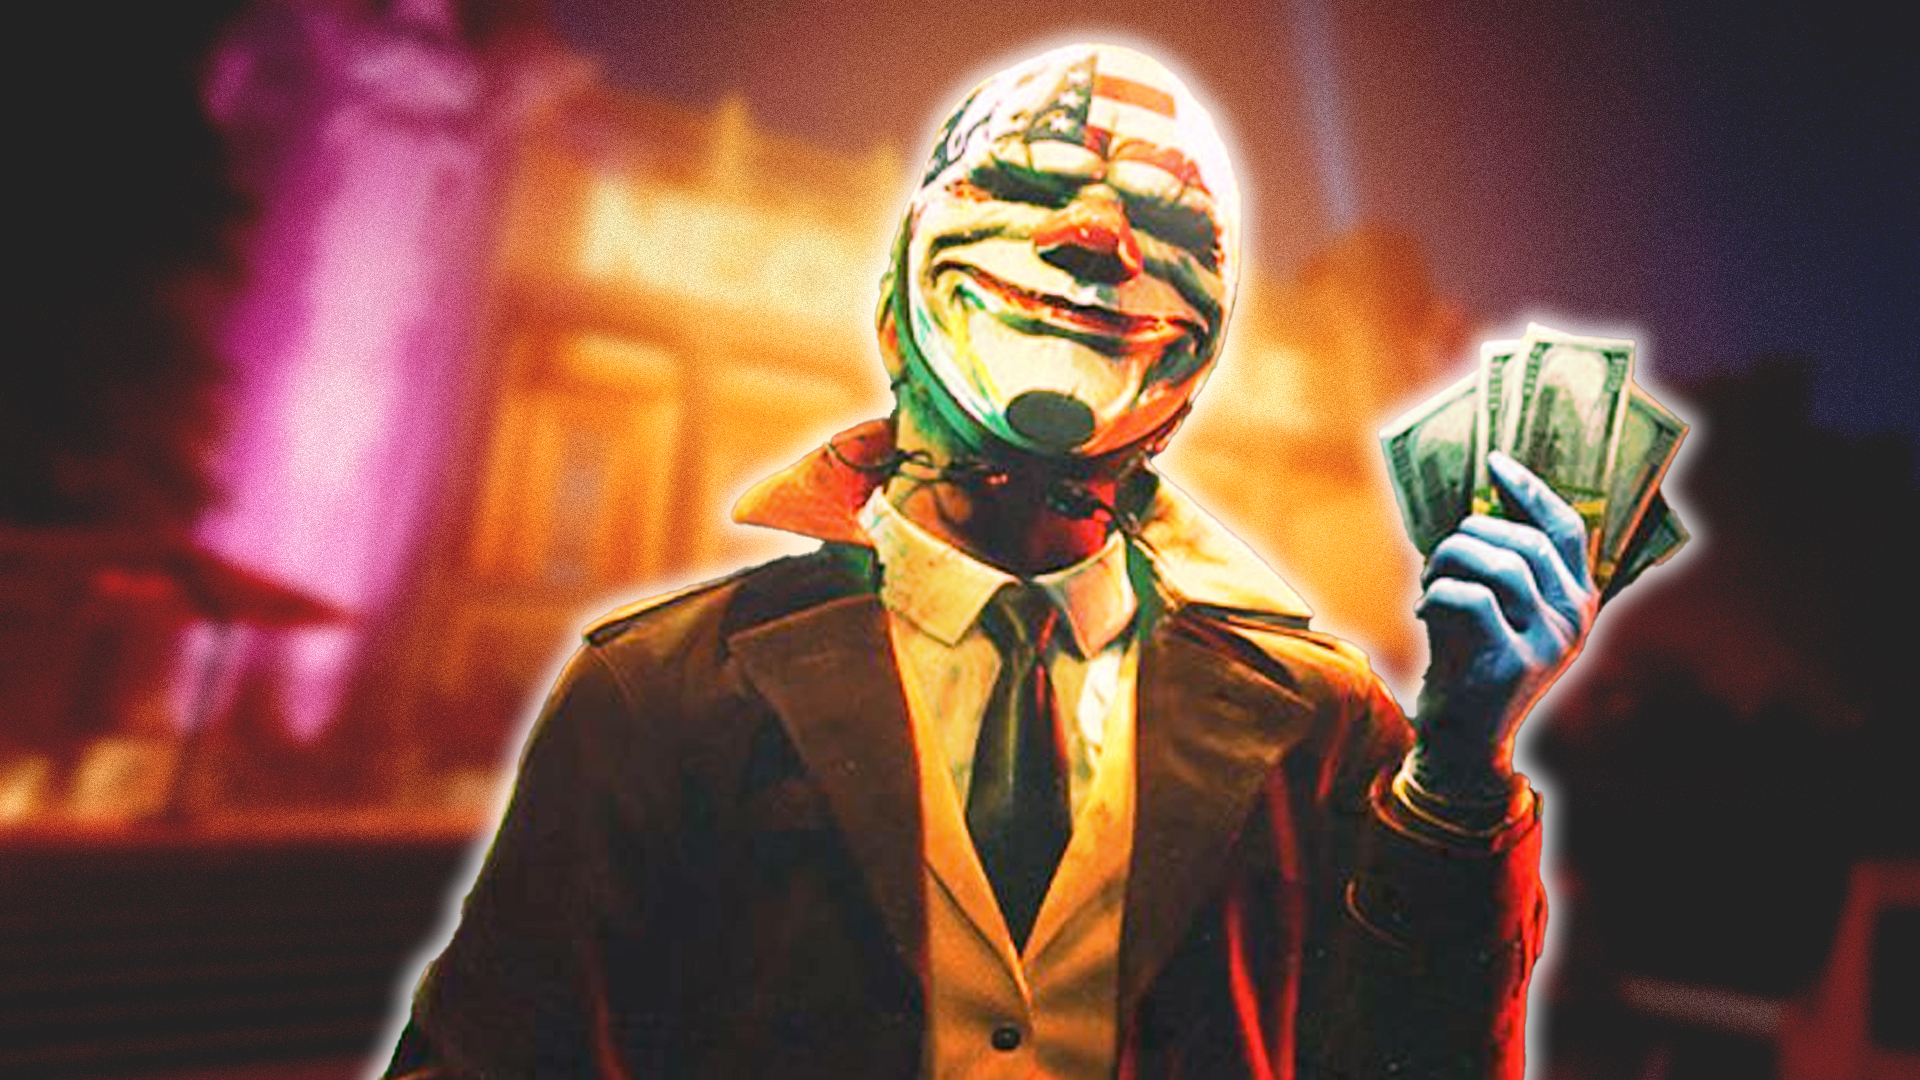 Payday 3 breaks into the Xbox Game Pass vault today